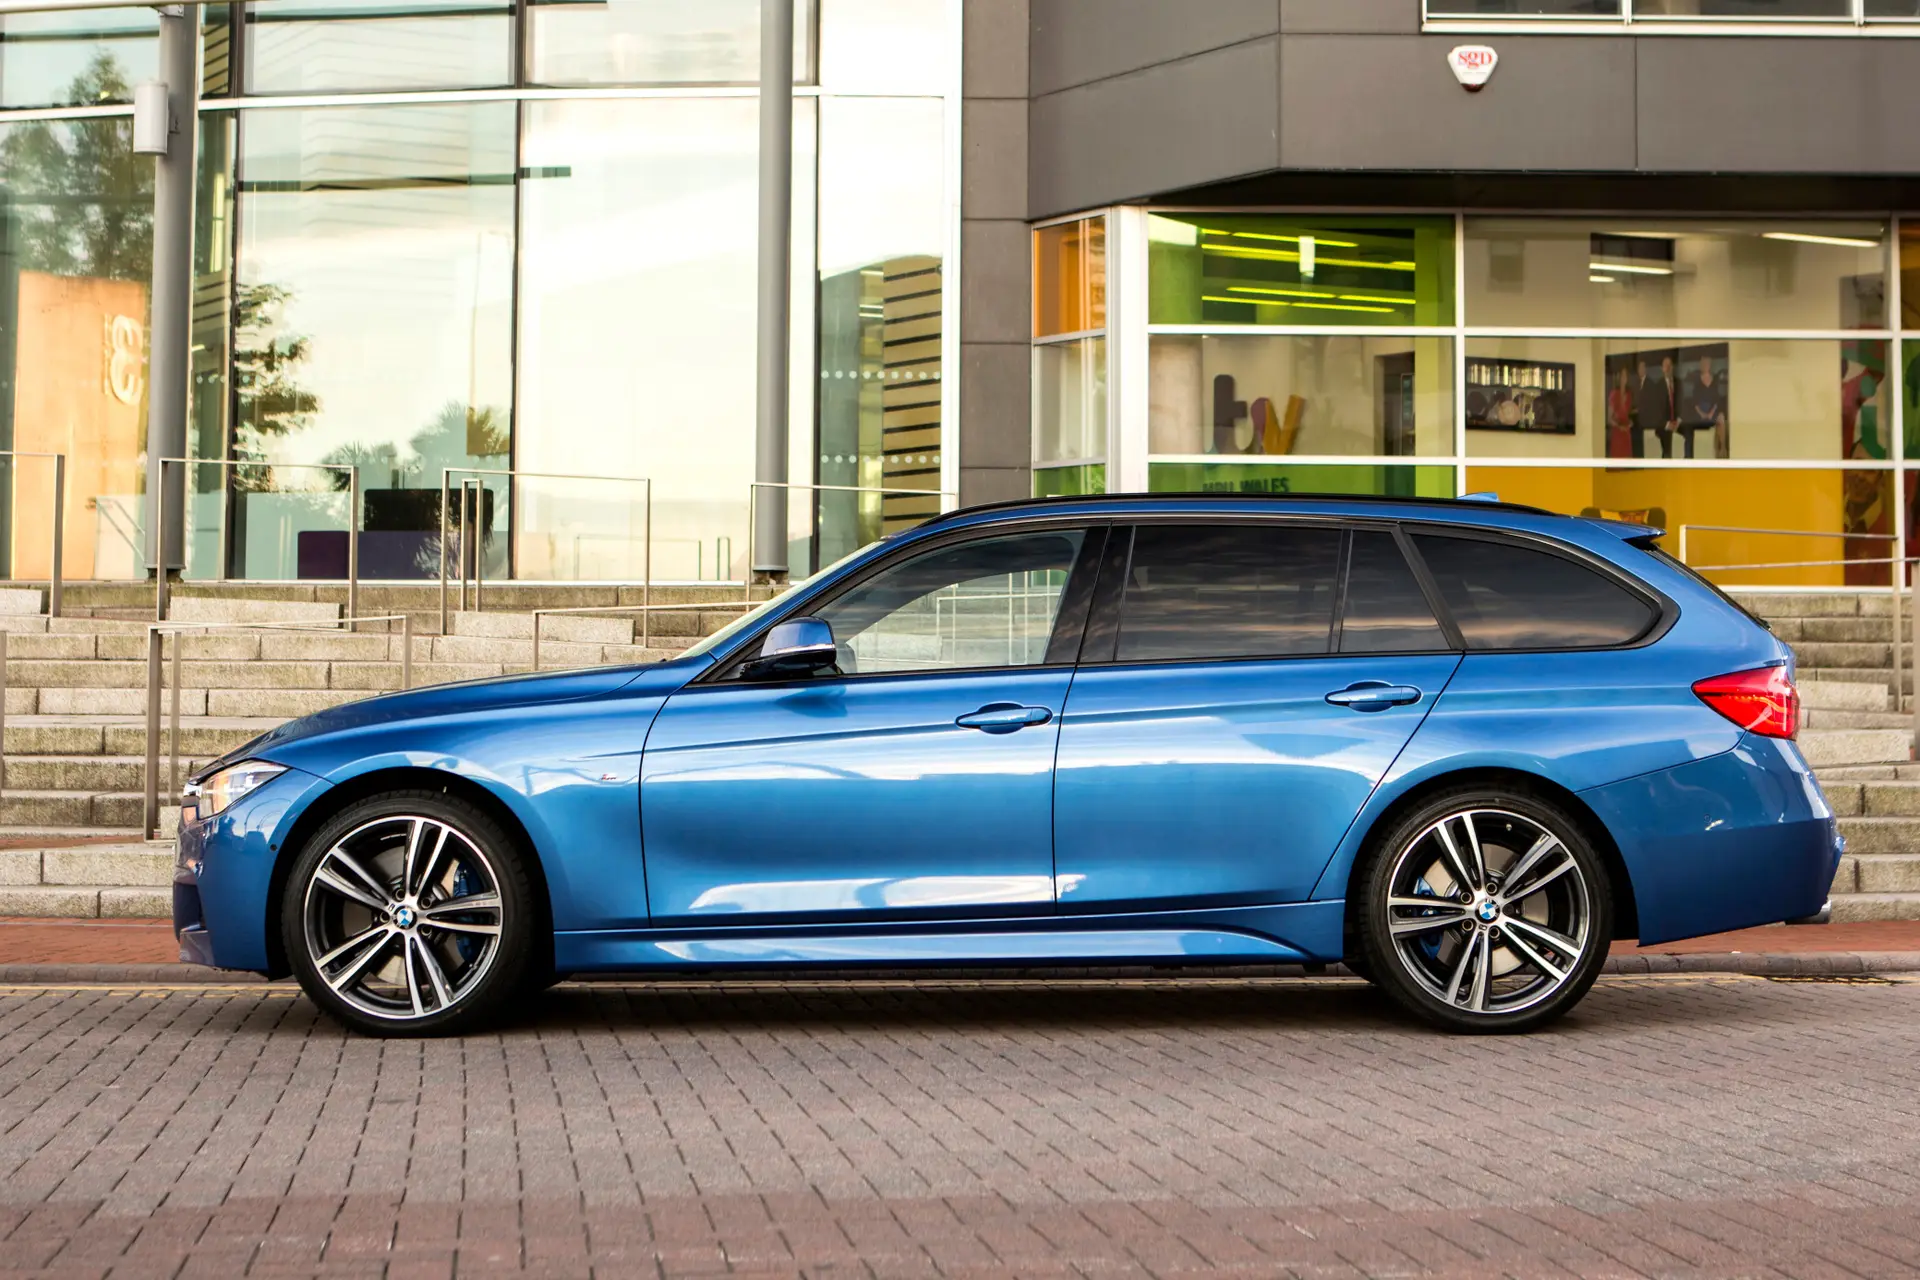 BMW 3 Series Touring (2012-2019) Review: exterior side photo of the BMW 3 Series Touring 